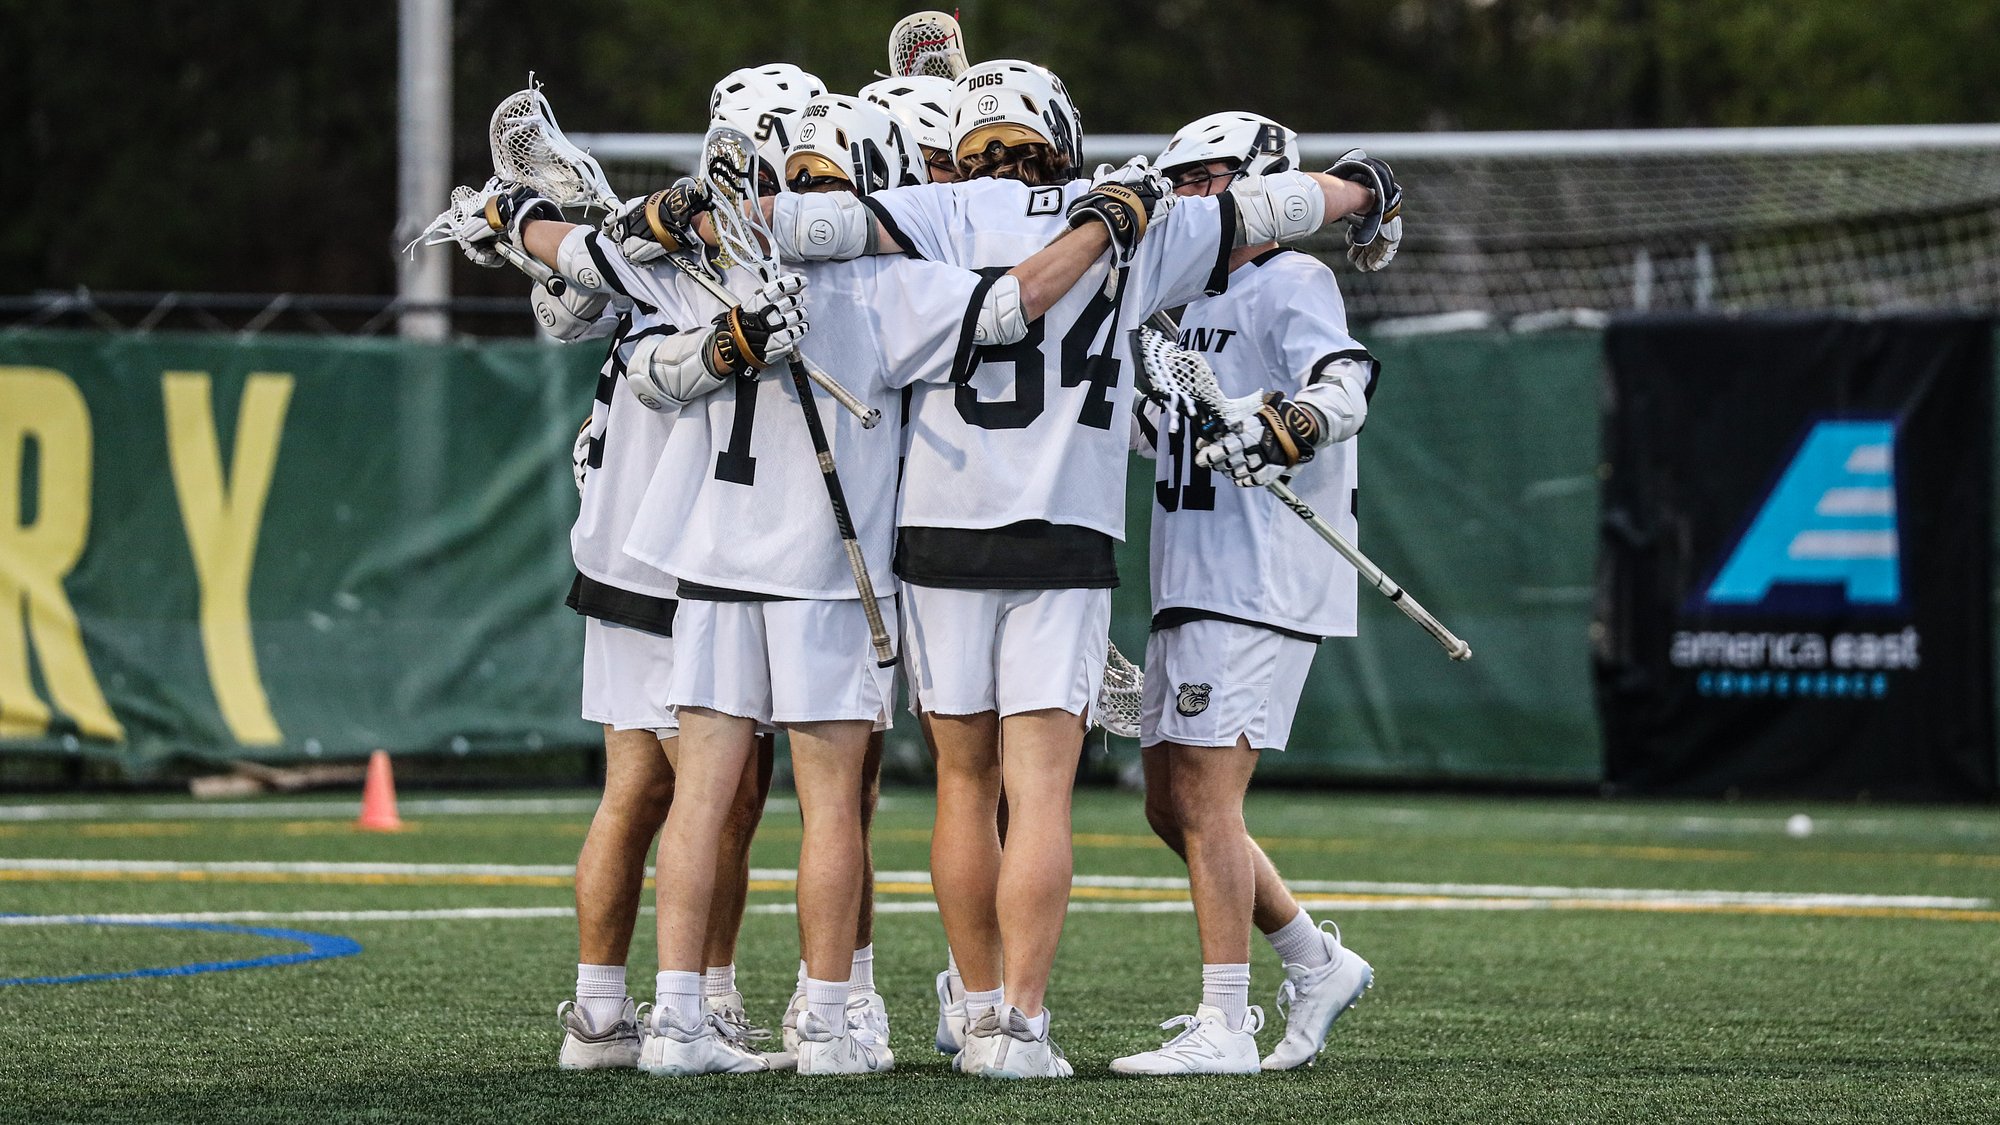 Bryant advances to America East Championship with 12-11 win over Binghamton